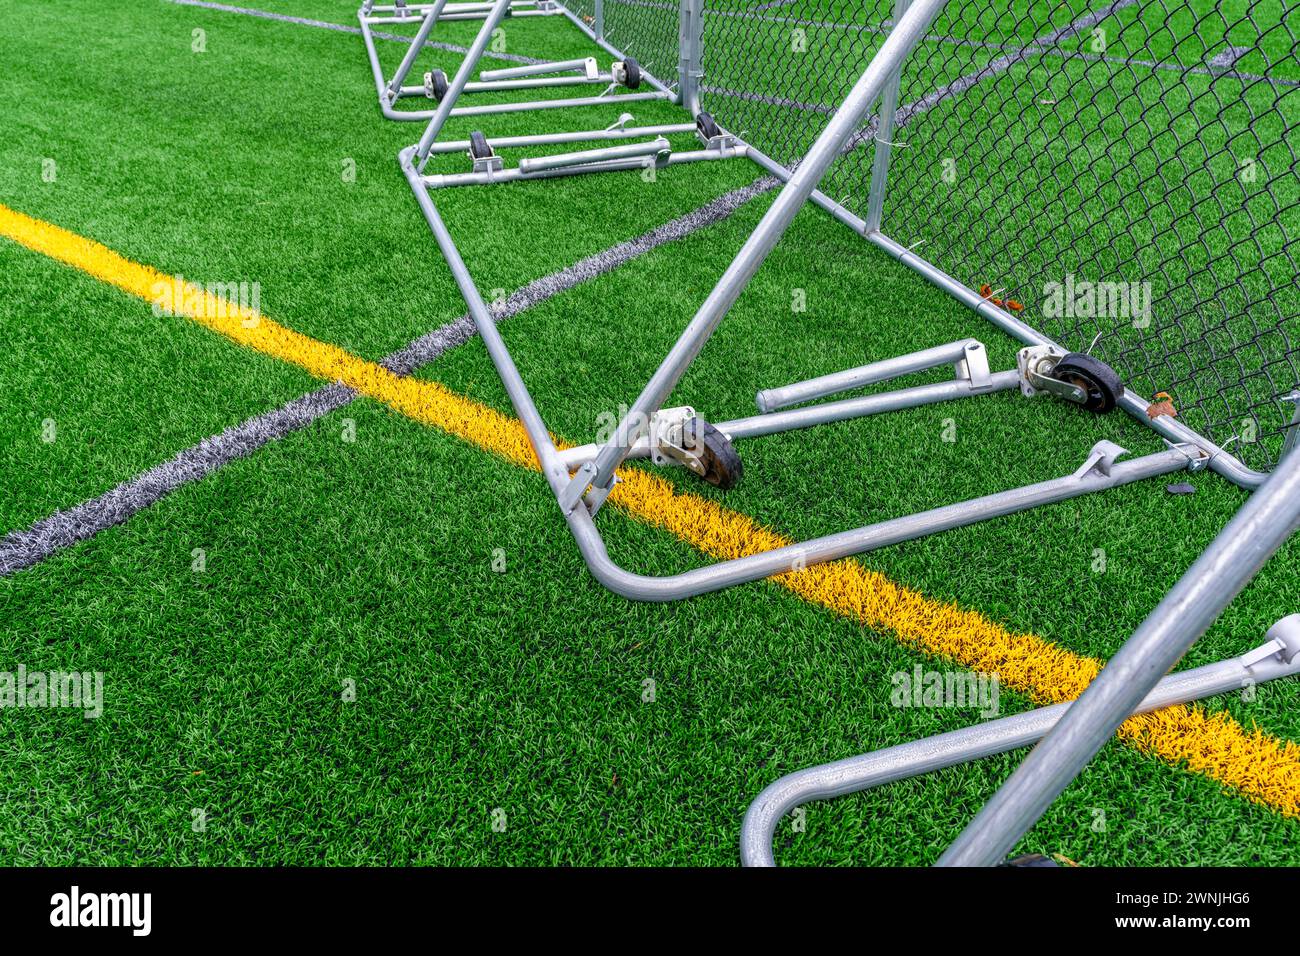 Portable softball baseball outfield fence with red fence cap on a synthetic turf football Stock Photo